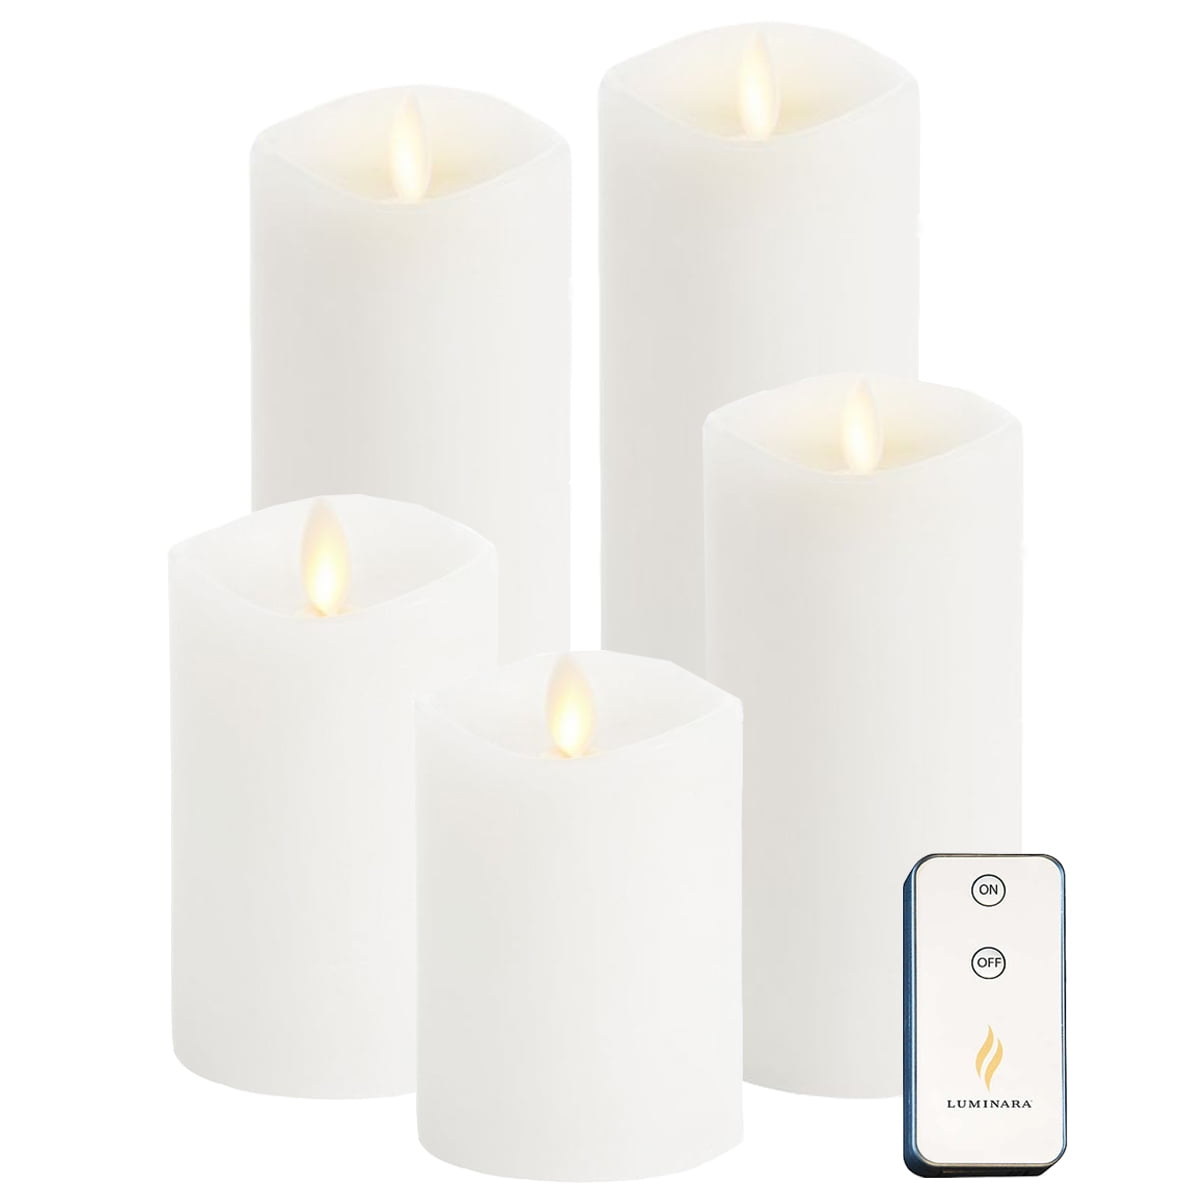 Luminara Tea lights Realistic Bright Flickering Flameless Rechargeable Candles 